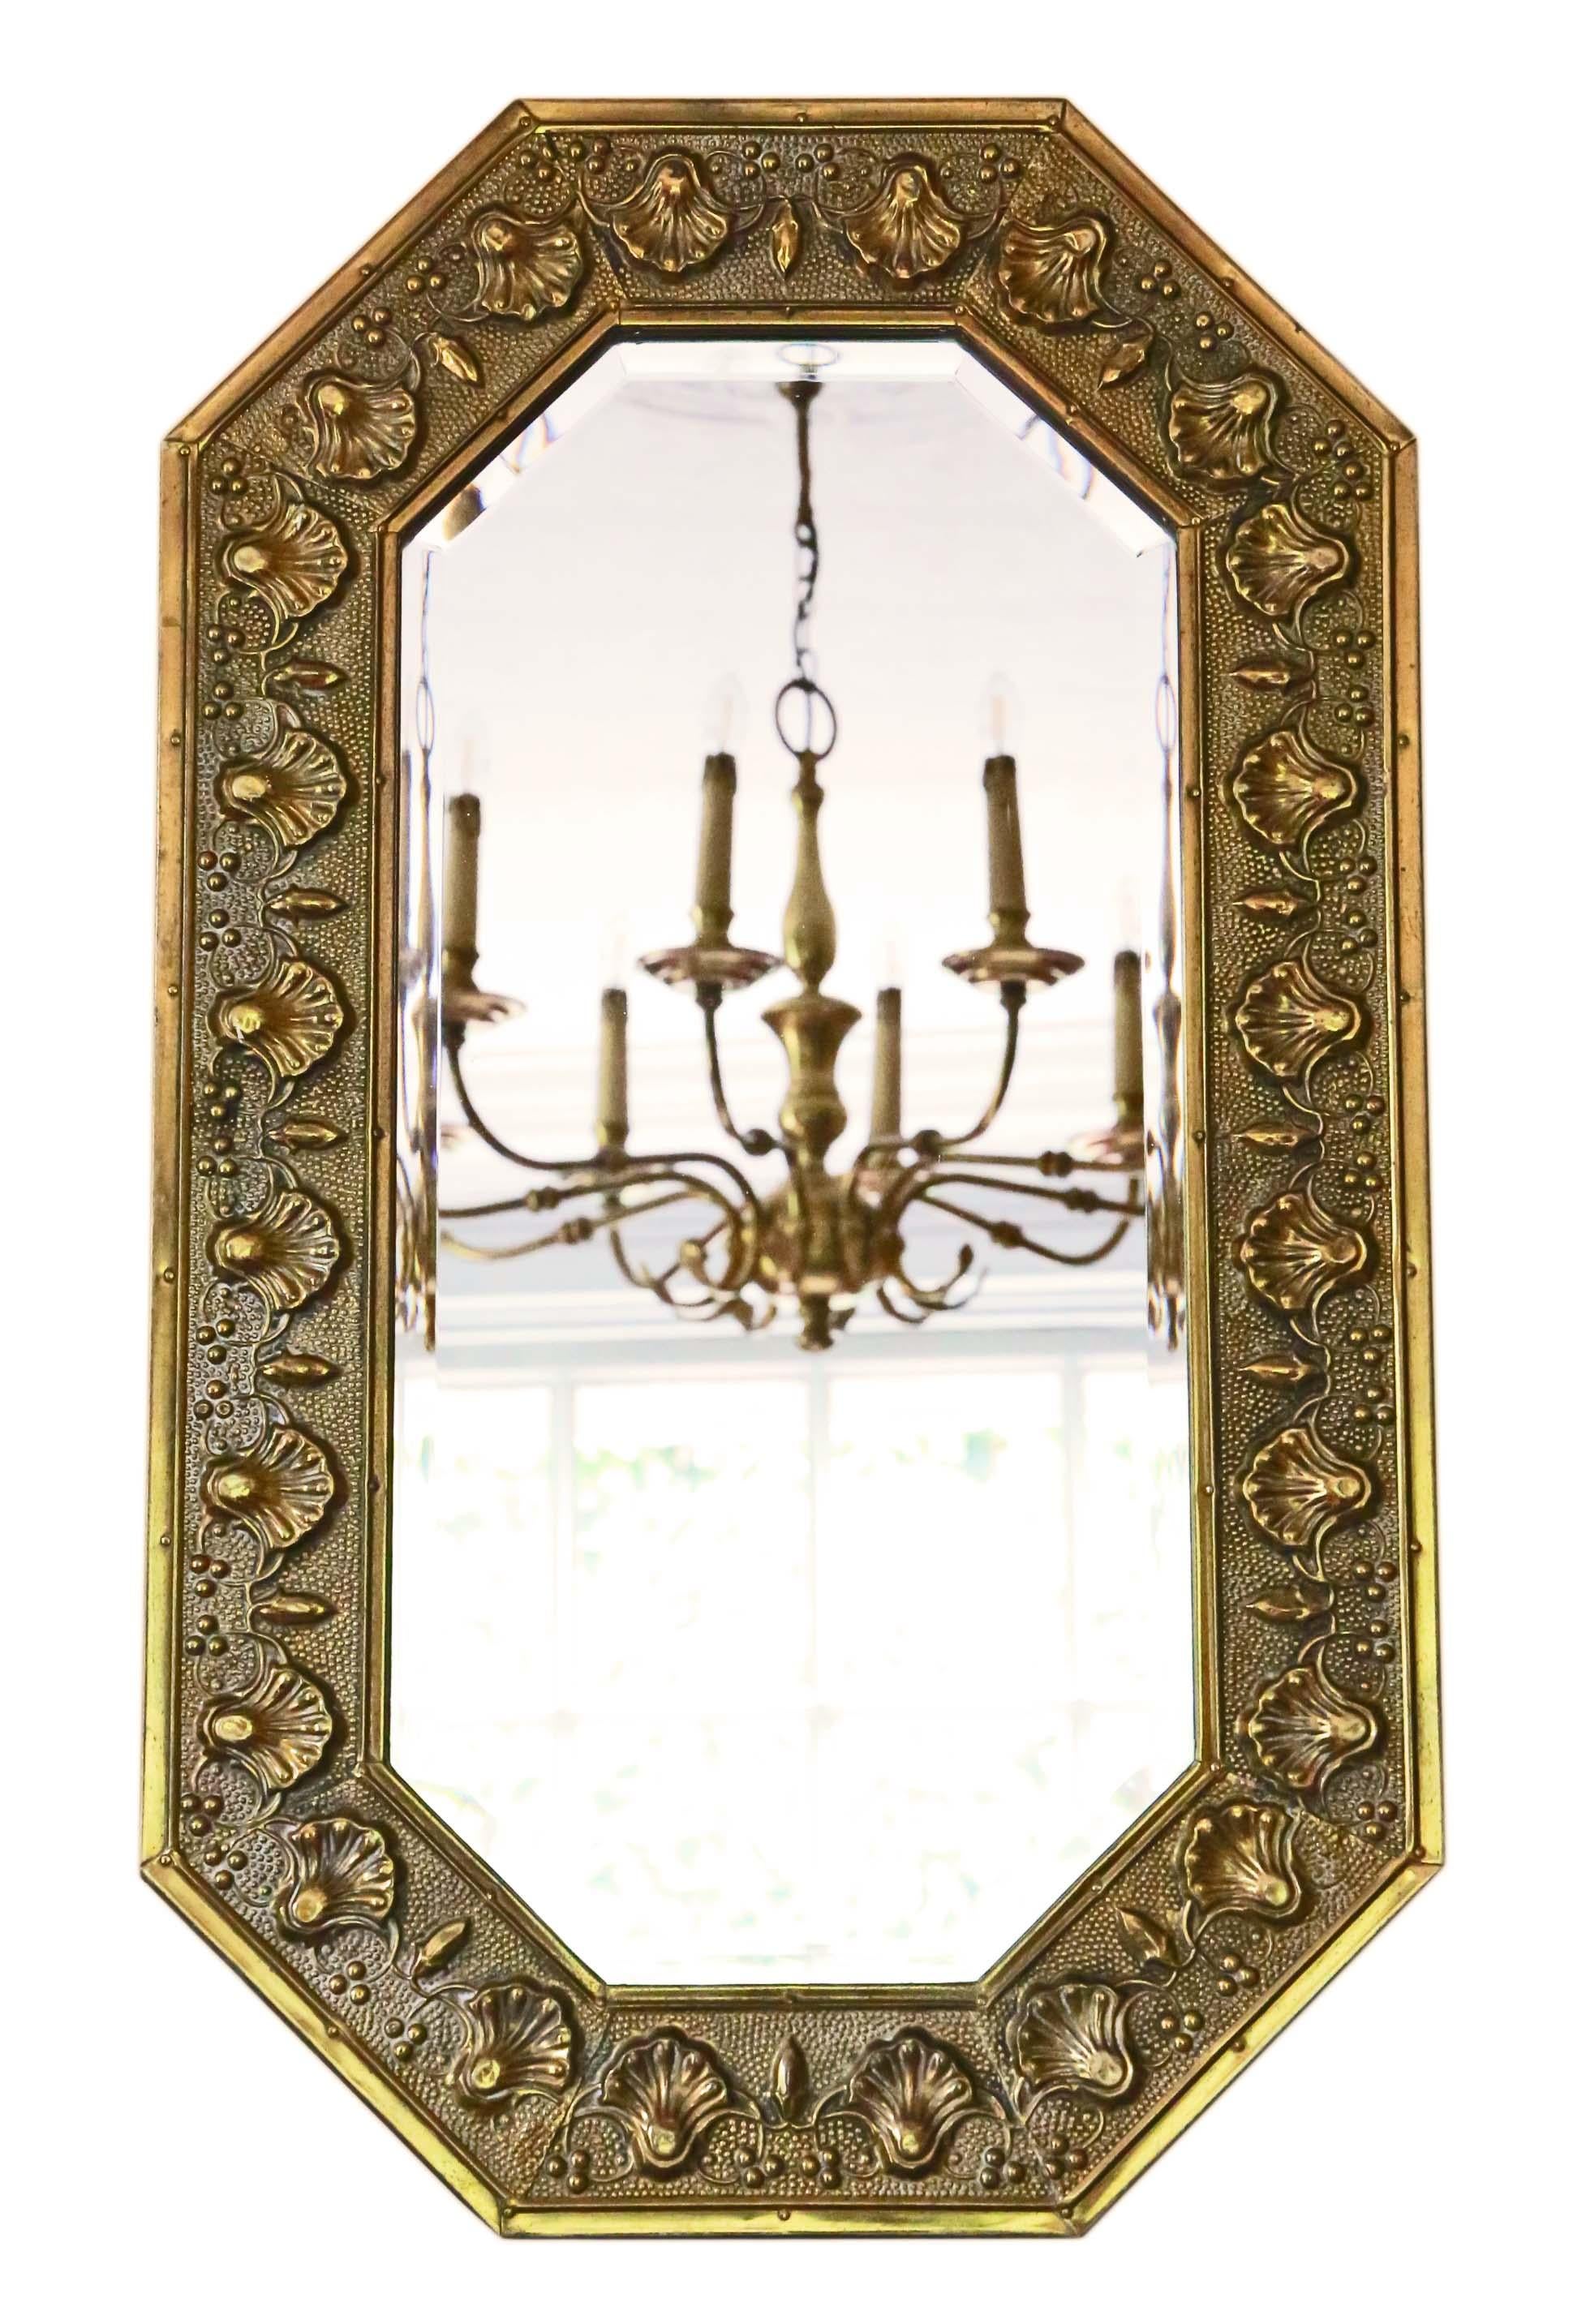 Early 20th Century Art Nouveau Brass Wall Or Overmantle Mirror